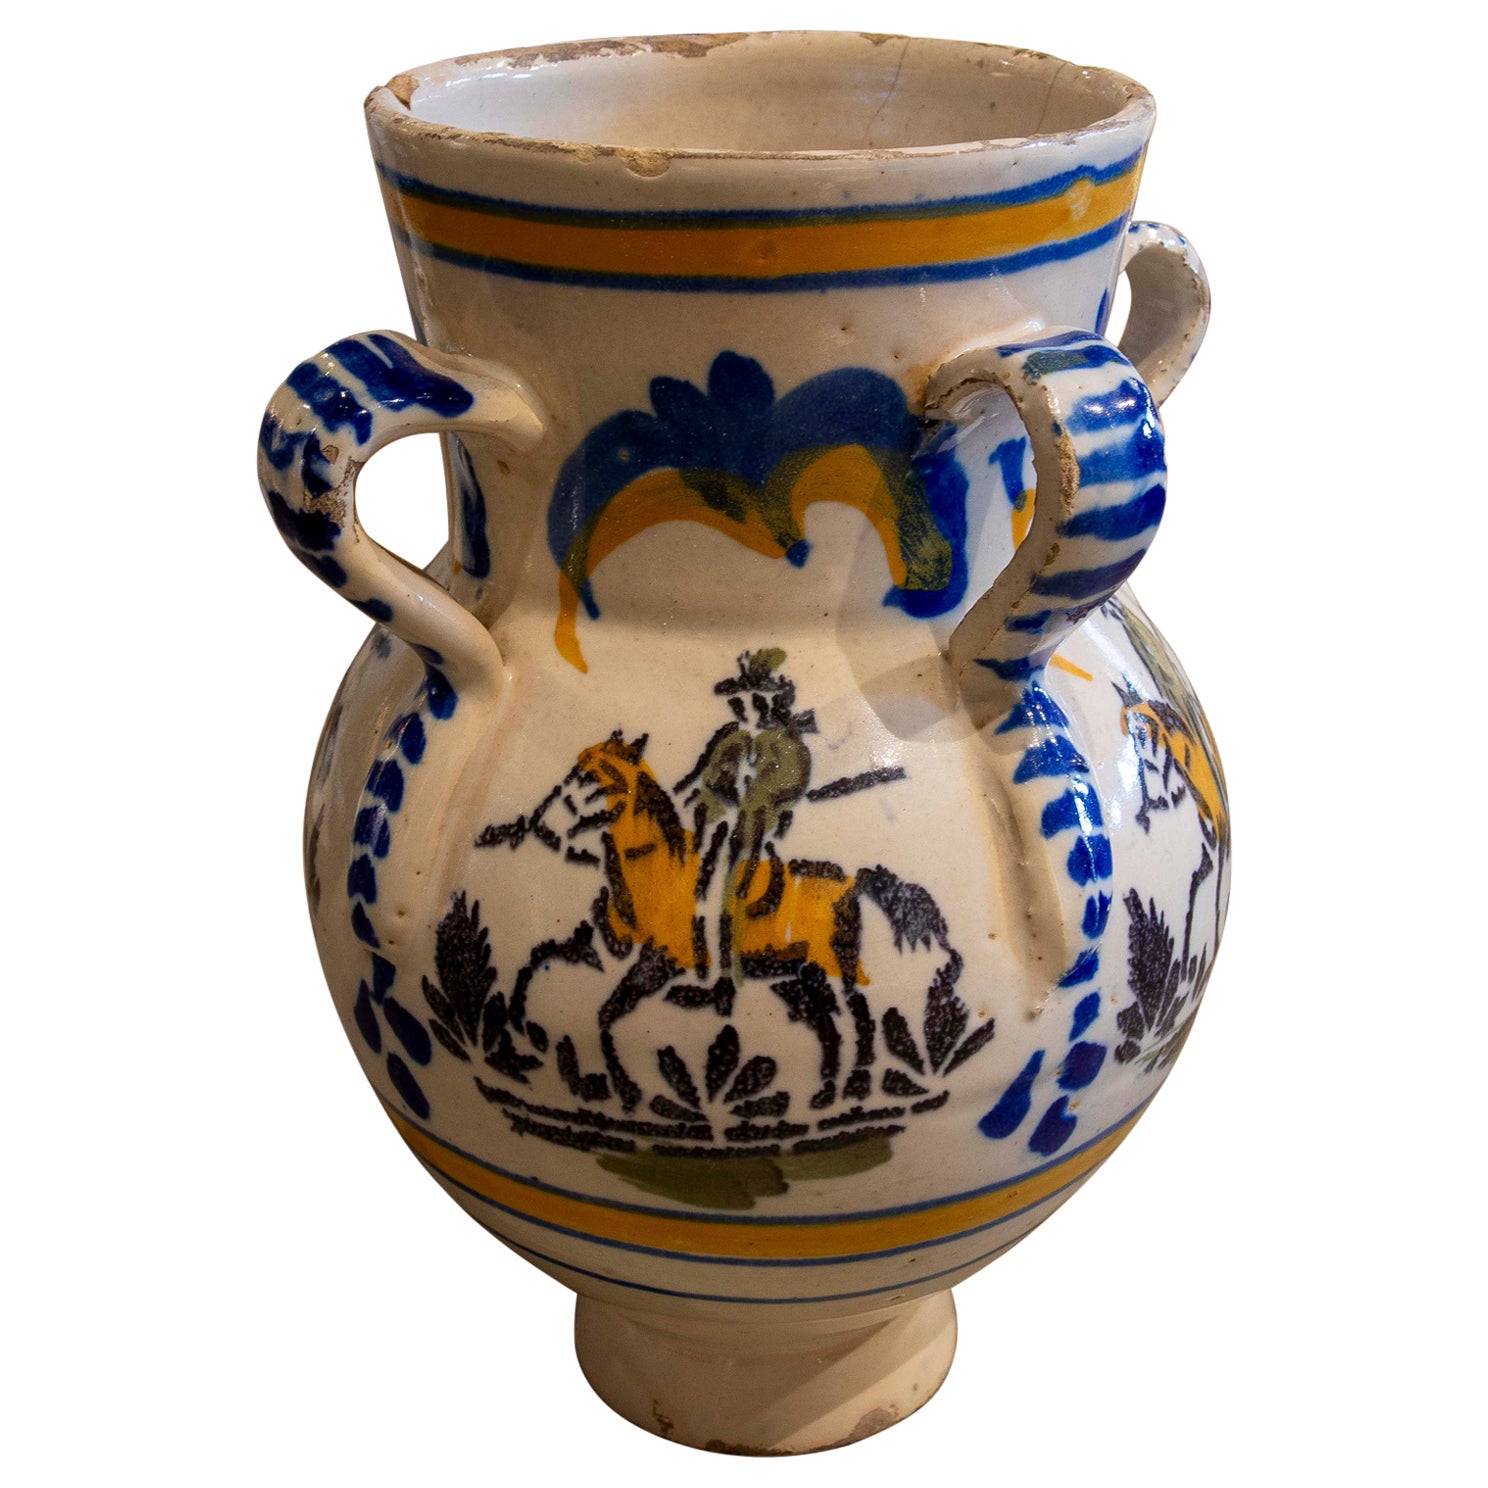 19th Century Spanish Glazed Ceramic Jar with Handles and a character on Horsebac